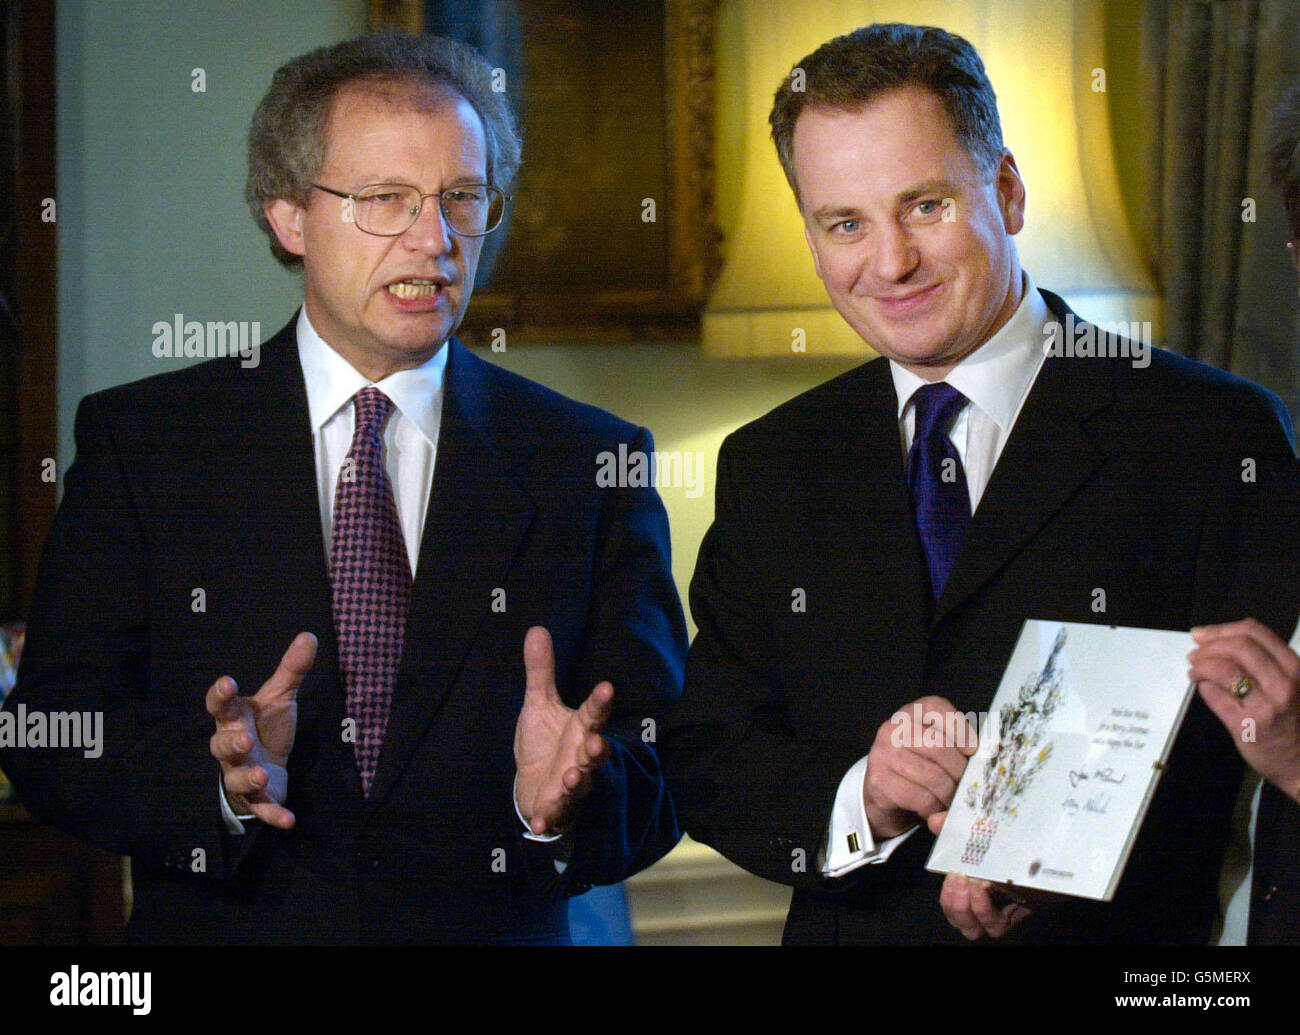 Ex-Scottish First Minister Henry McLeish (L) and current Scottish First Minister Jack McConnell (R) launch the official Scottish Executive Christmas card which was designed by pupils from John Fergus Special Needs School in Glenrothes, at Bute House in Edinburgh. Stock Photo